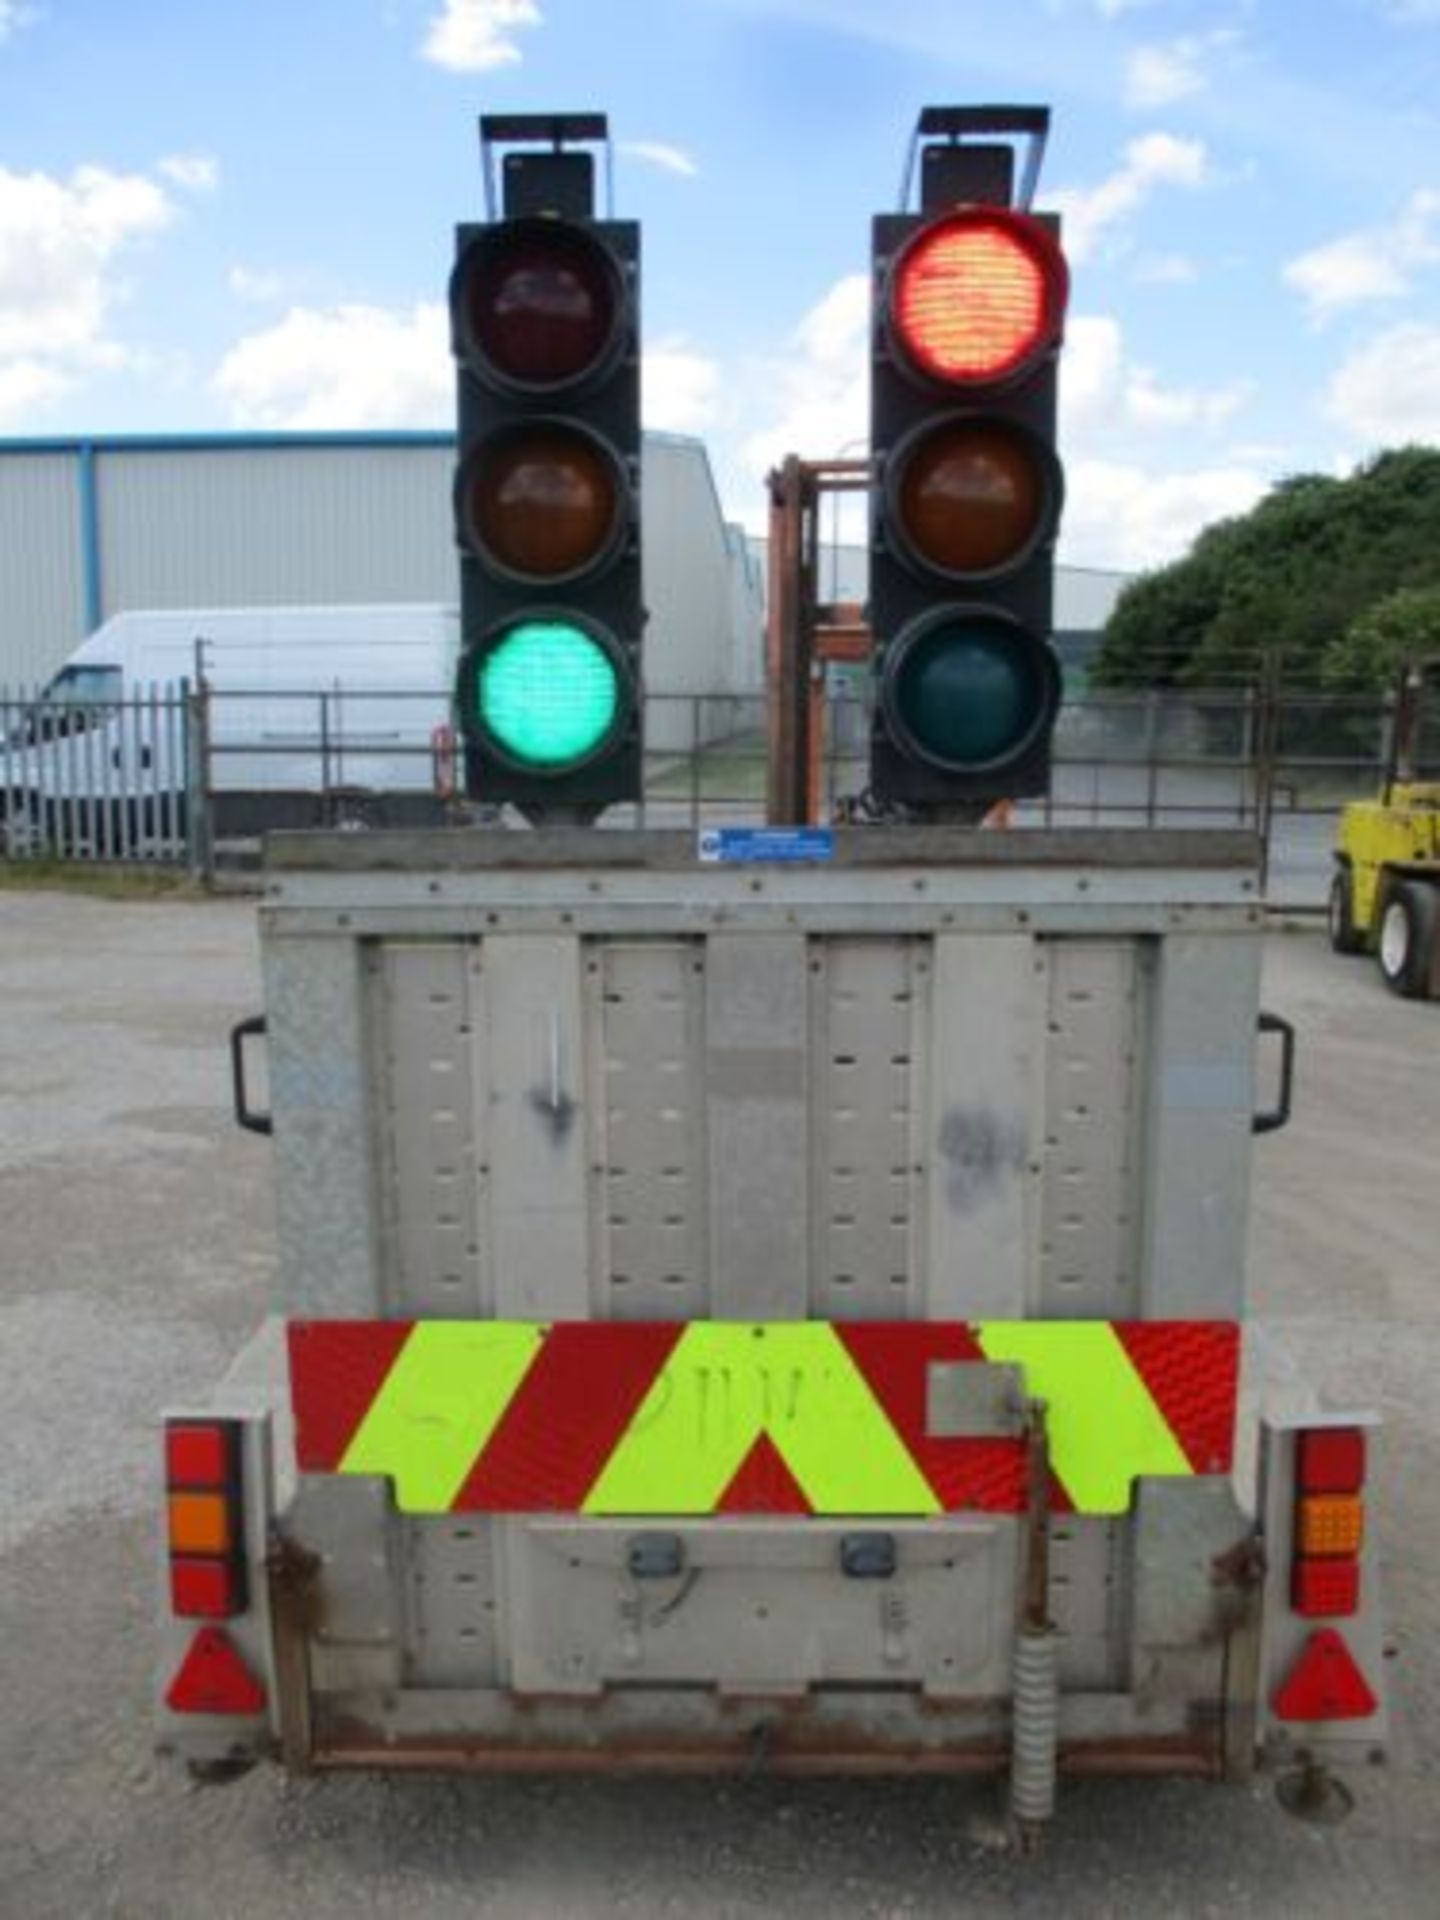 PIKE TRAFFIC LIGHTS XL2 RADIO LIGHT BATTERY 2 WAY MICRO SRL 4 DELIVERY ARRANGED - Image 5 of 8